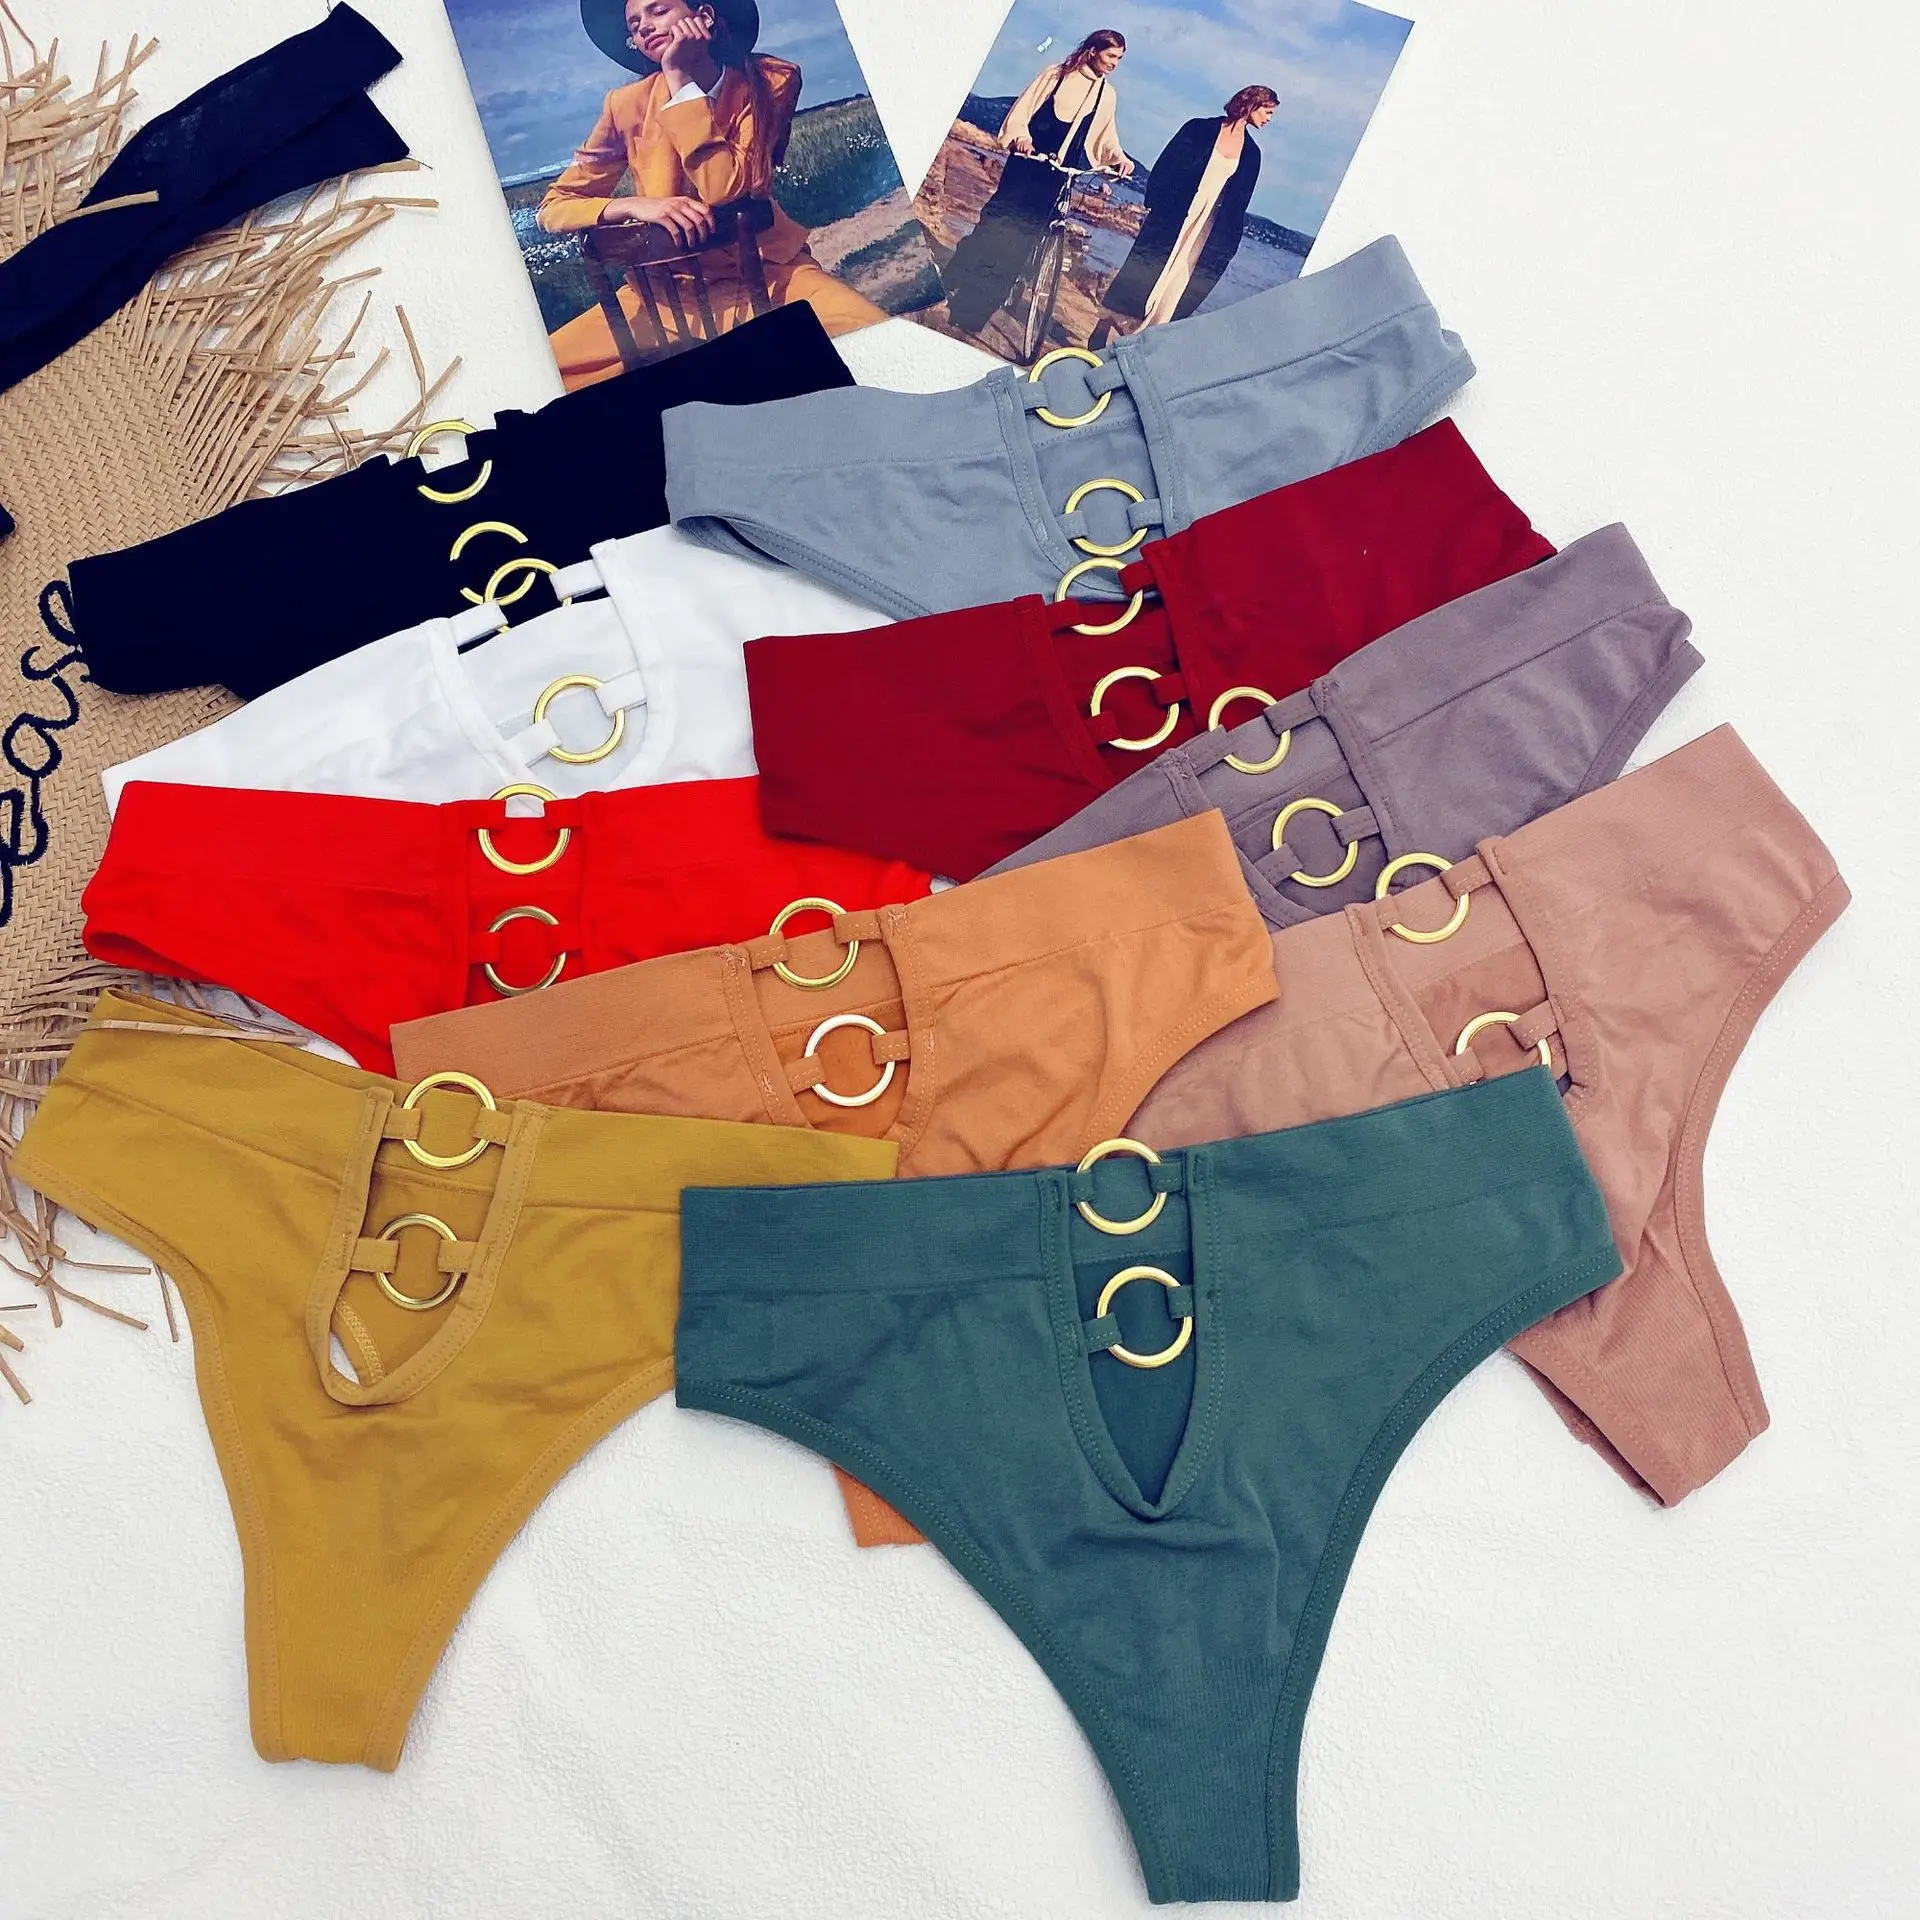 New Women's Underwear Sexy Solid Color Panties Fashion Metal Ring Comfort Briefs Mid Waist Seamless Underpants Female Lingerie